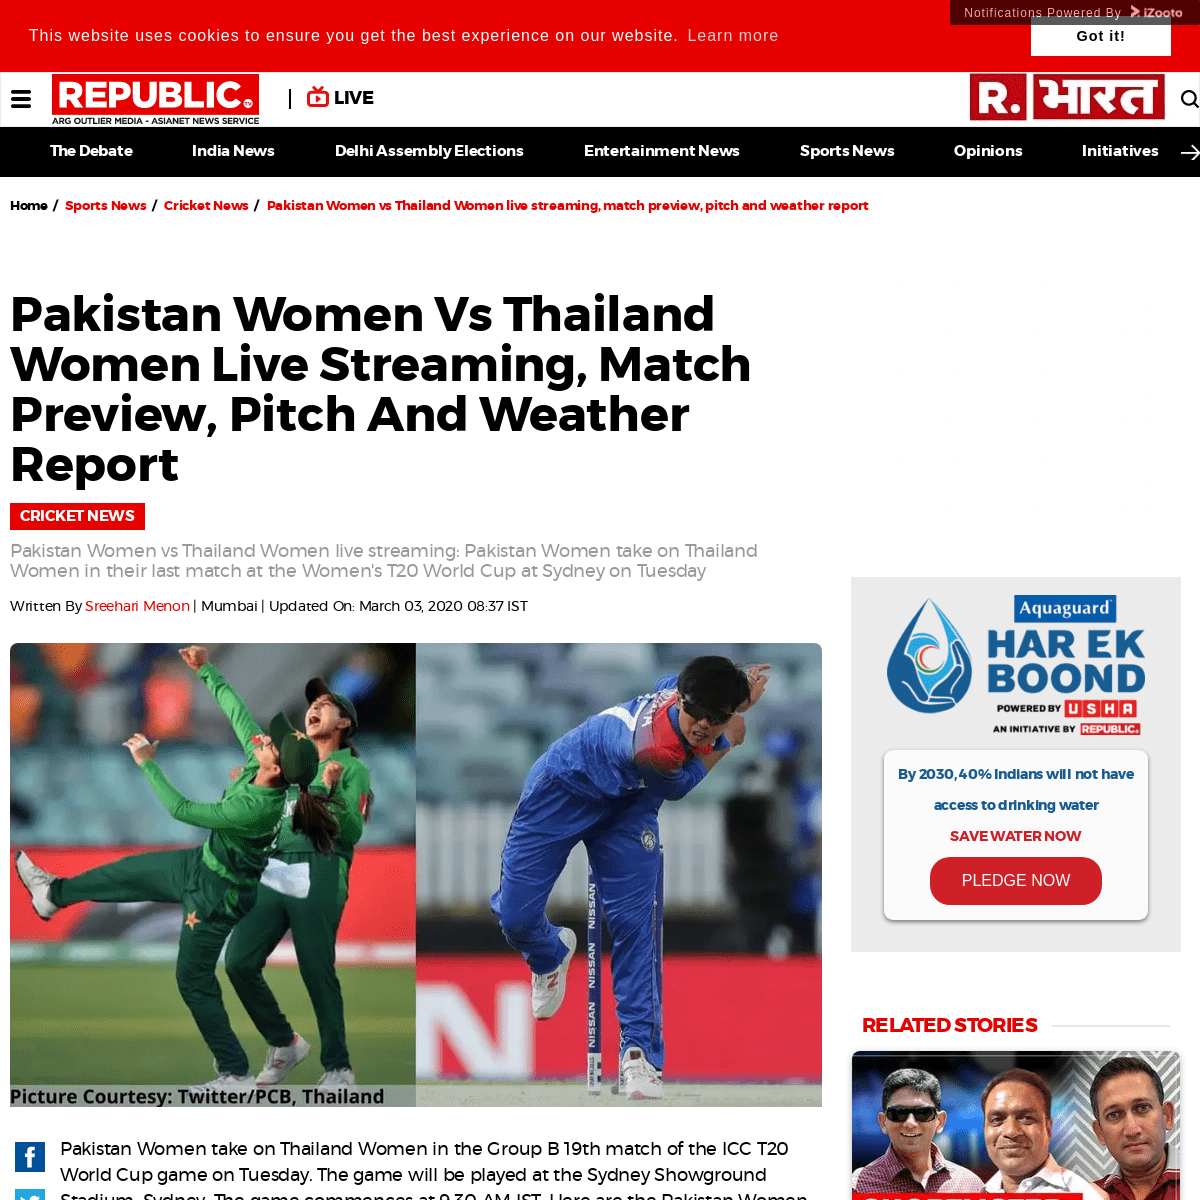 A complete backup of www.republicworld.com/sports-news/cricket-news/pk-w-vs-tl-w-live-streaming-match-preview-pitch-weather-repo